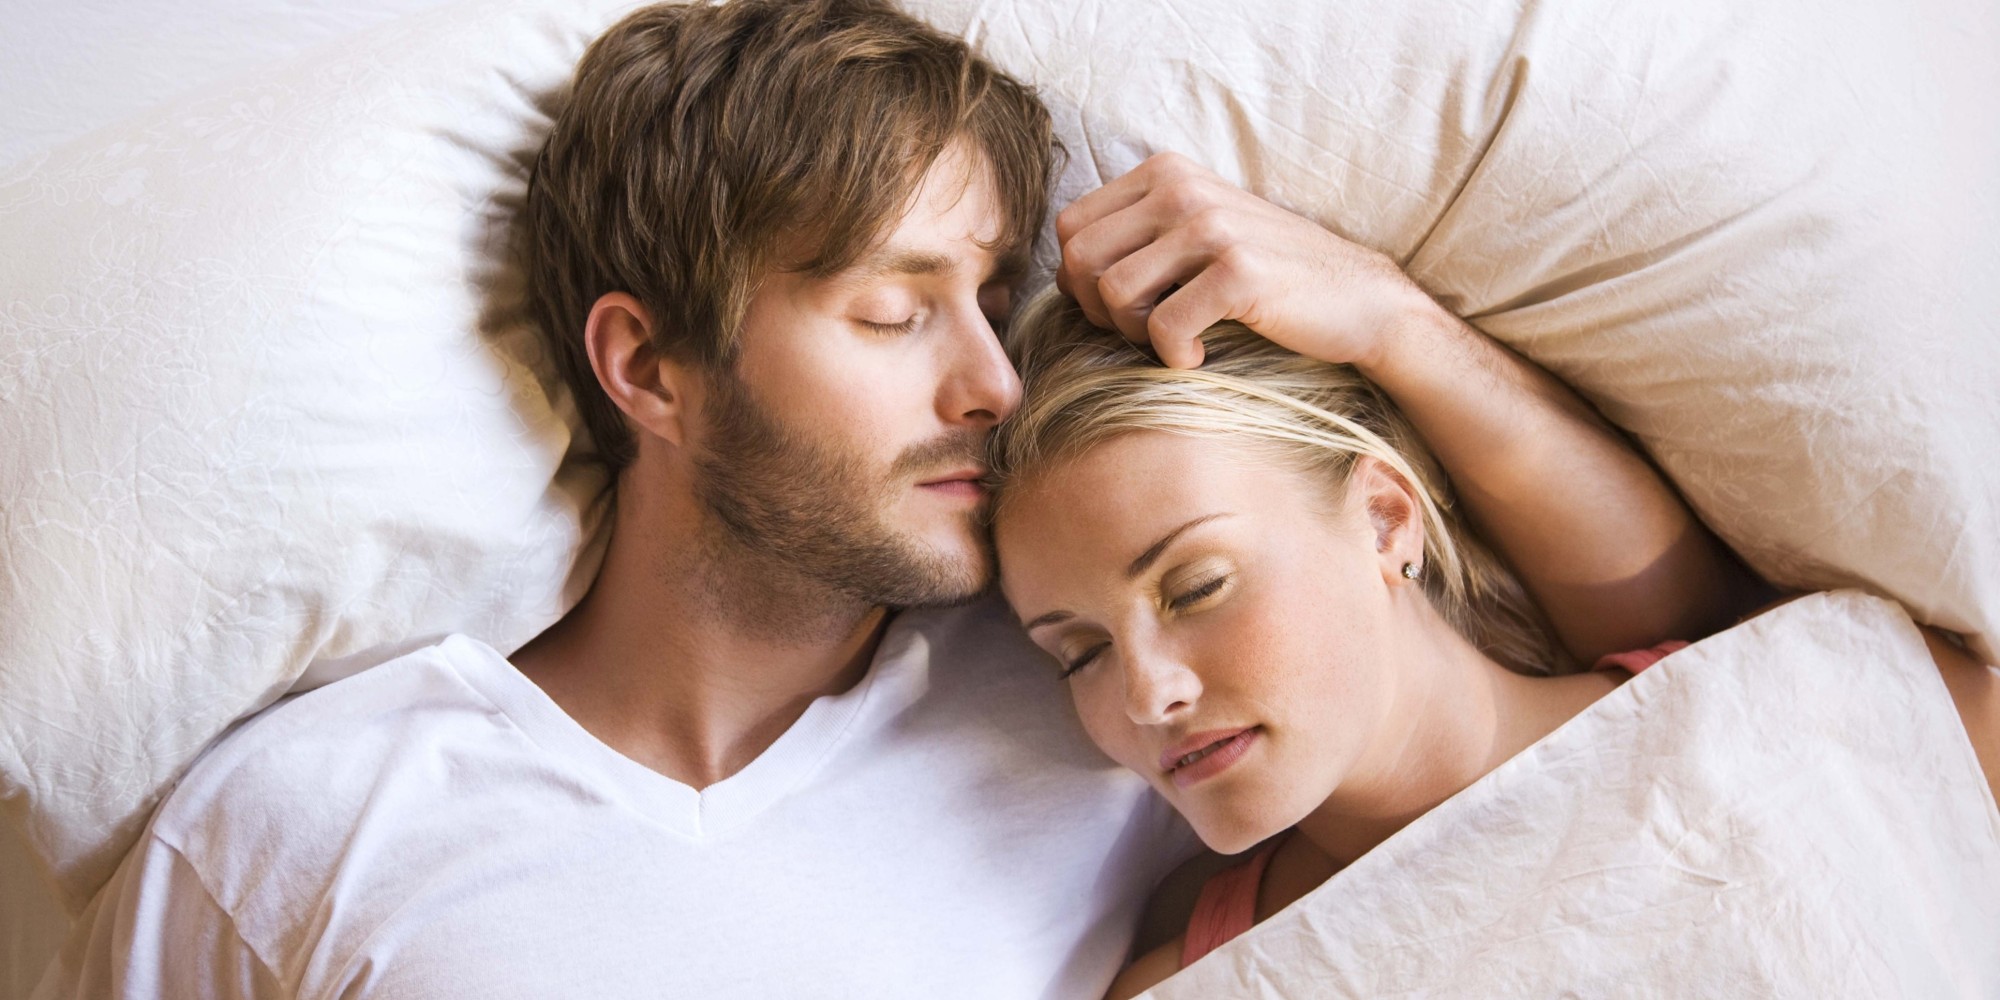 We Asked These Couples To Tell All About What Its Really Like To Sleep